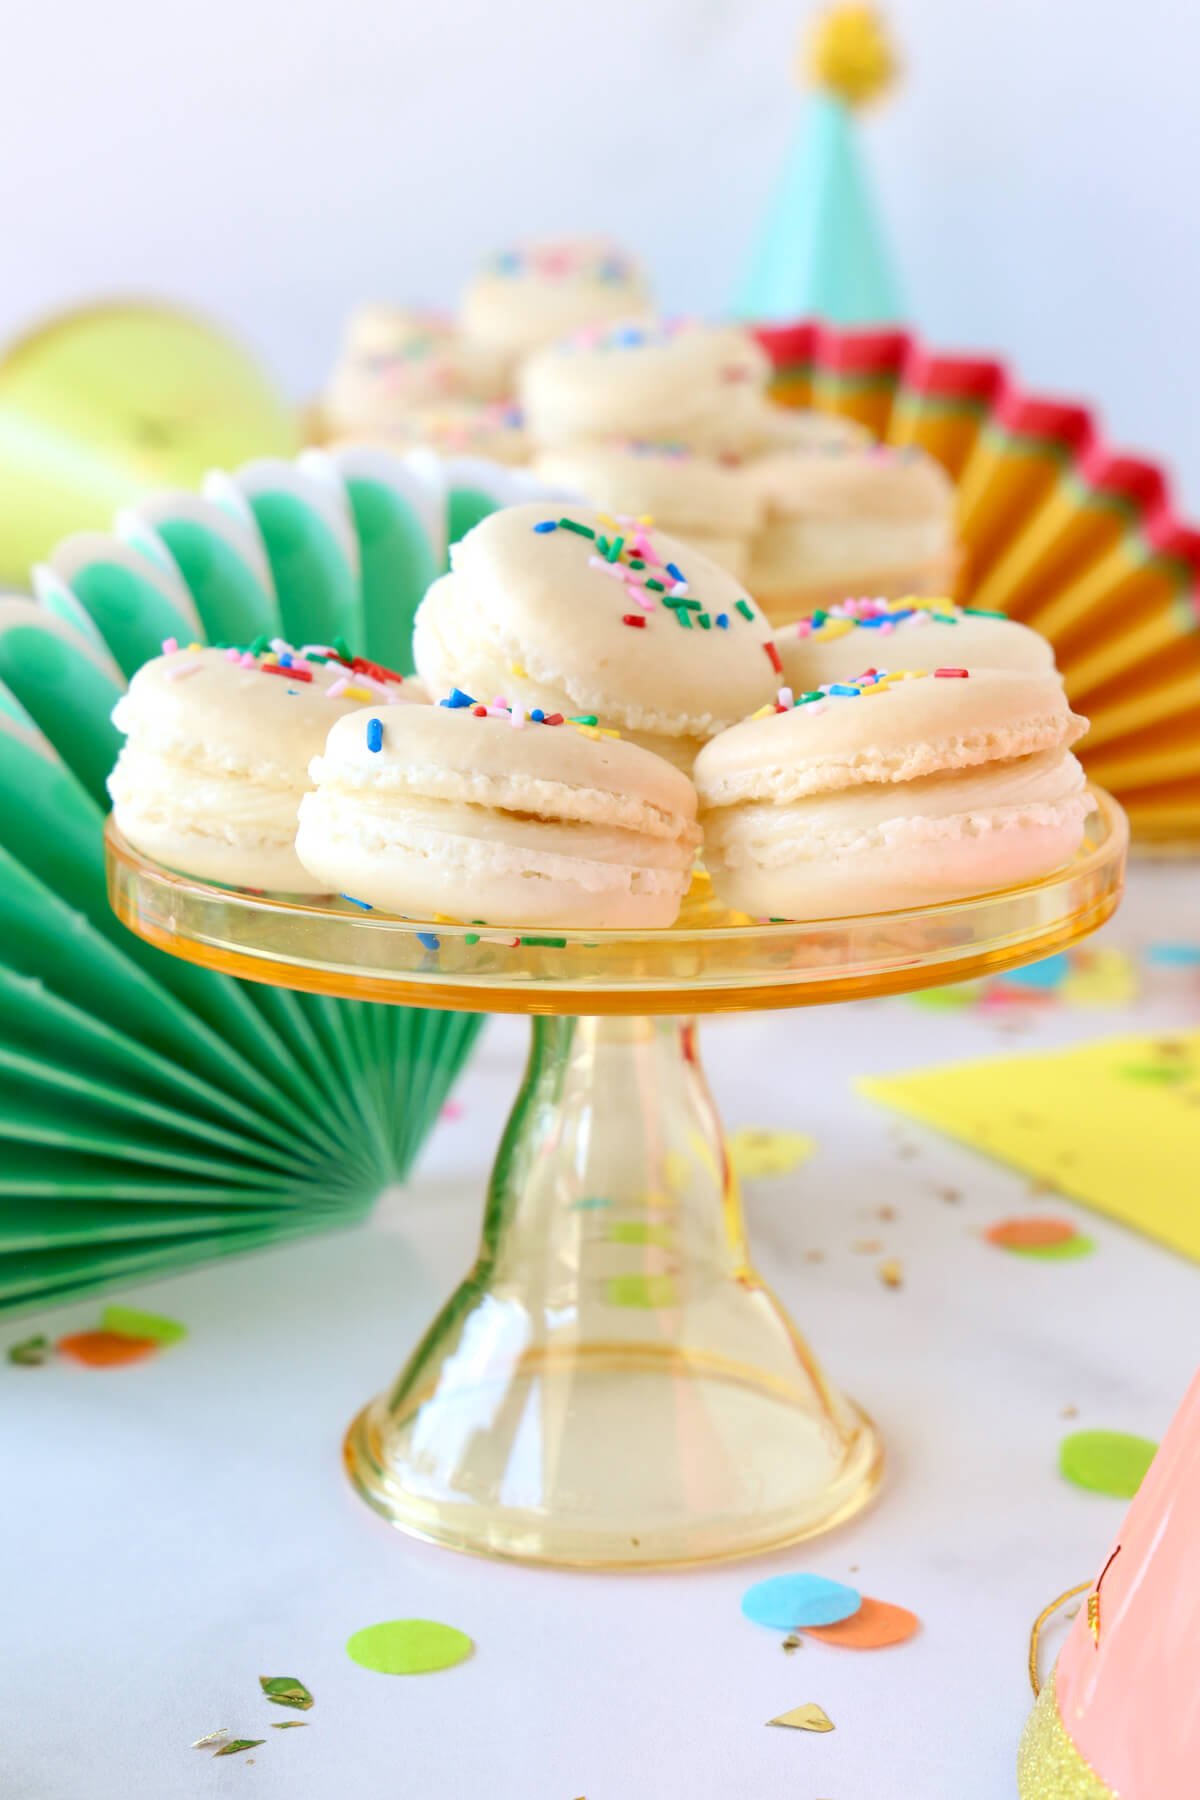 A mini cakestand stacked with white french macarons on a colorful decorated table.  